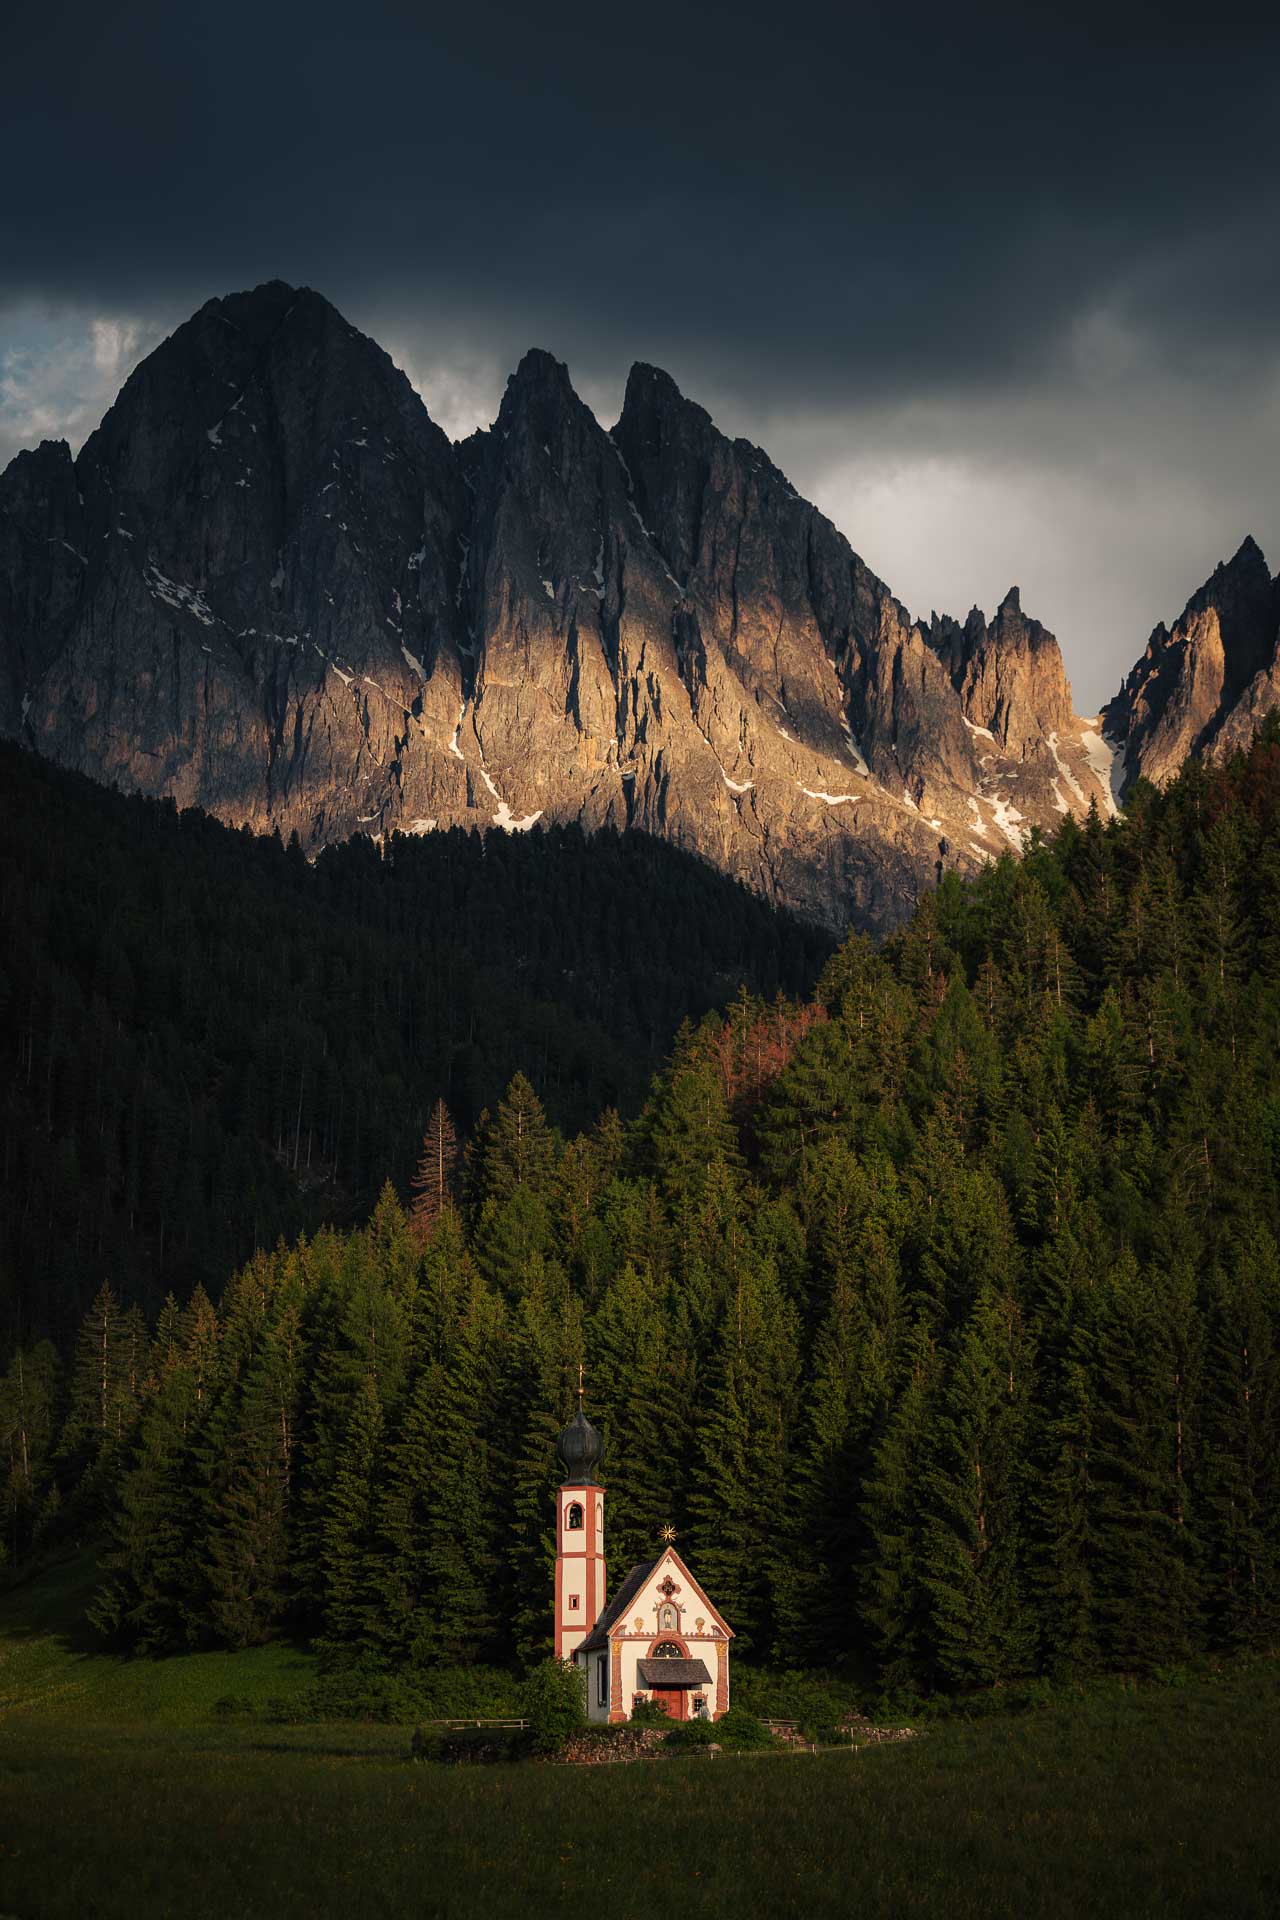 things to do in dolomites, dolomites things to do, best places to visit in dolomites, dolomites attractions, what to do in the dolomites, things to do in the dolomites